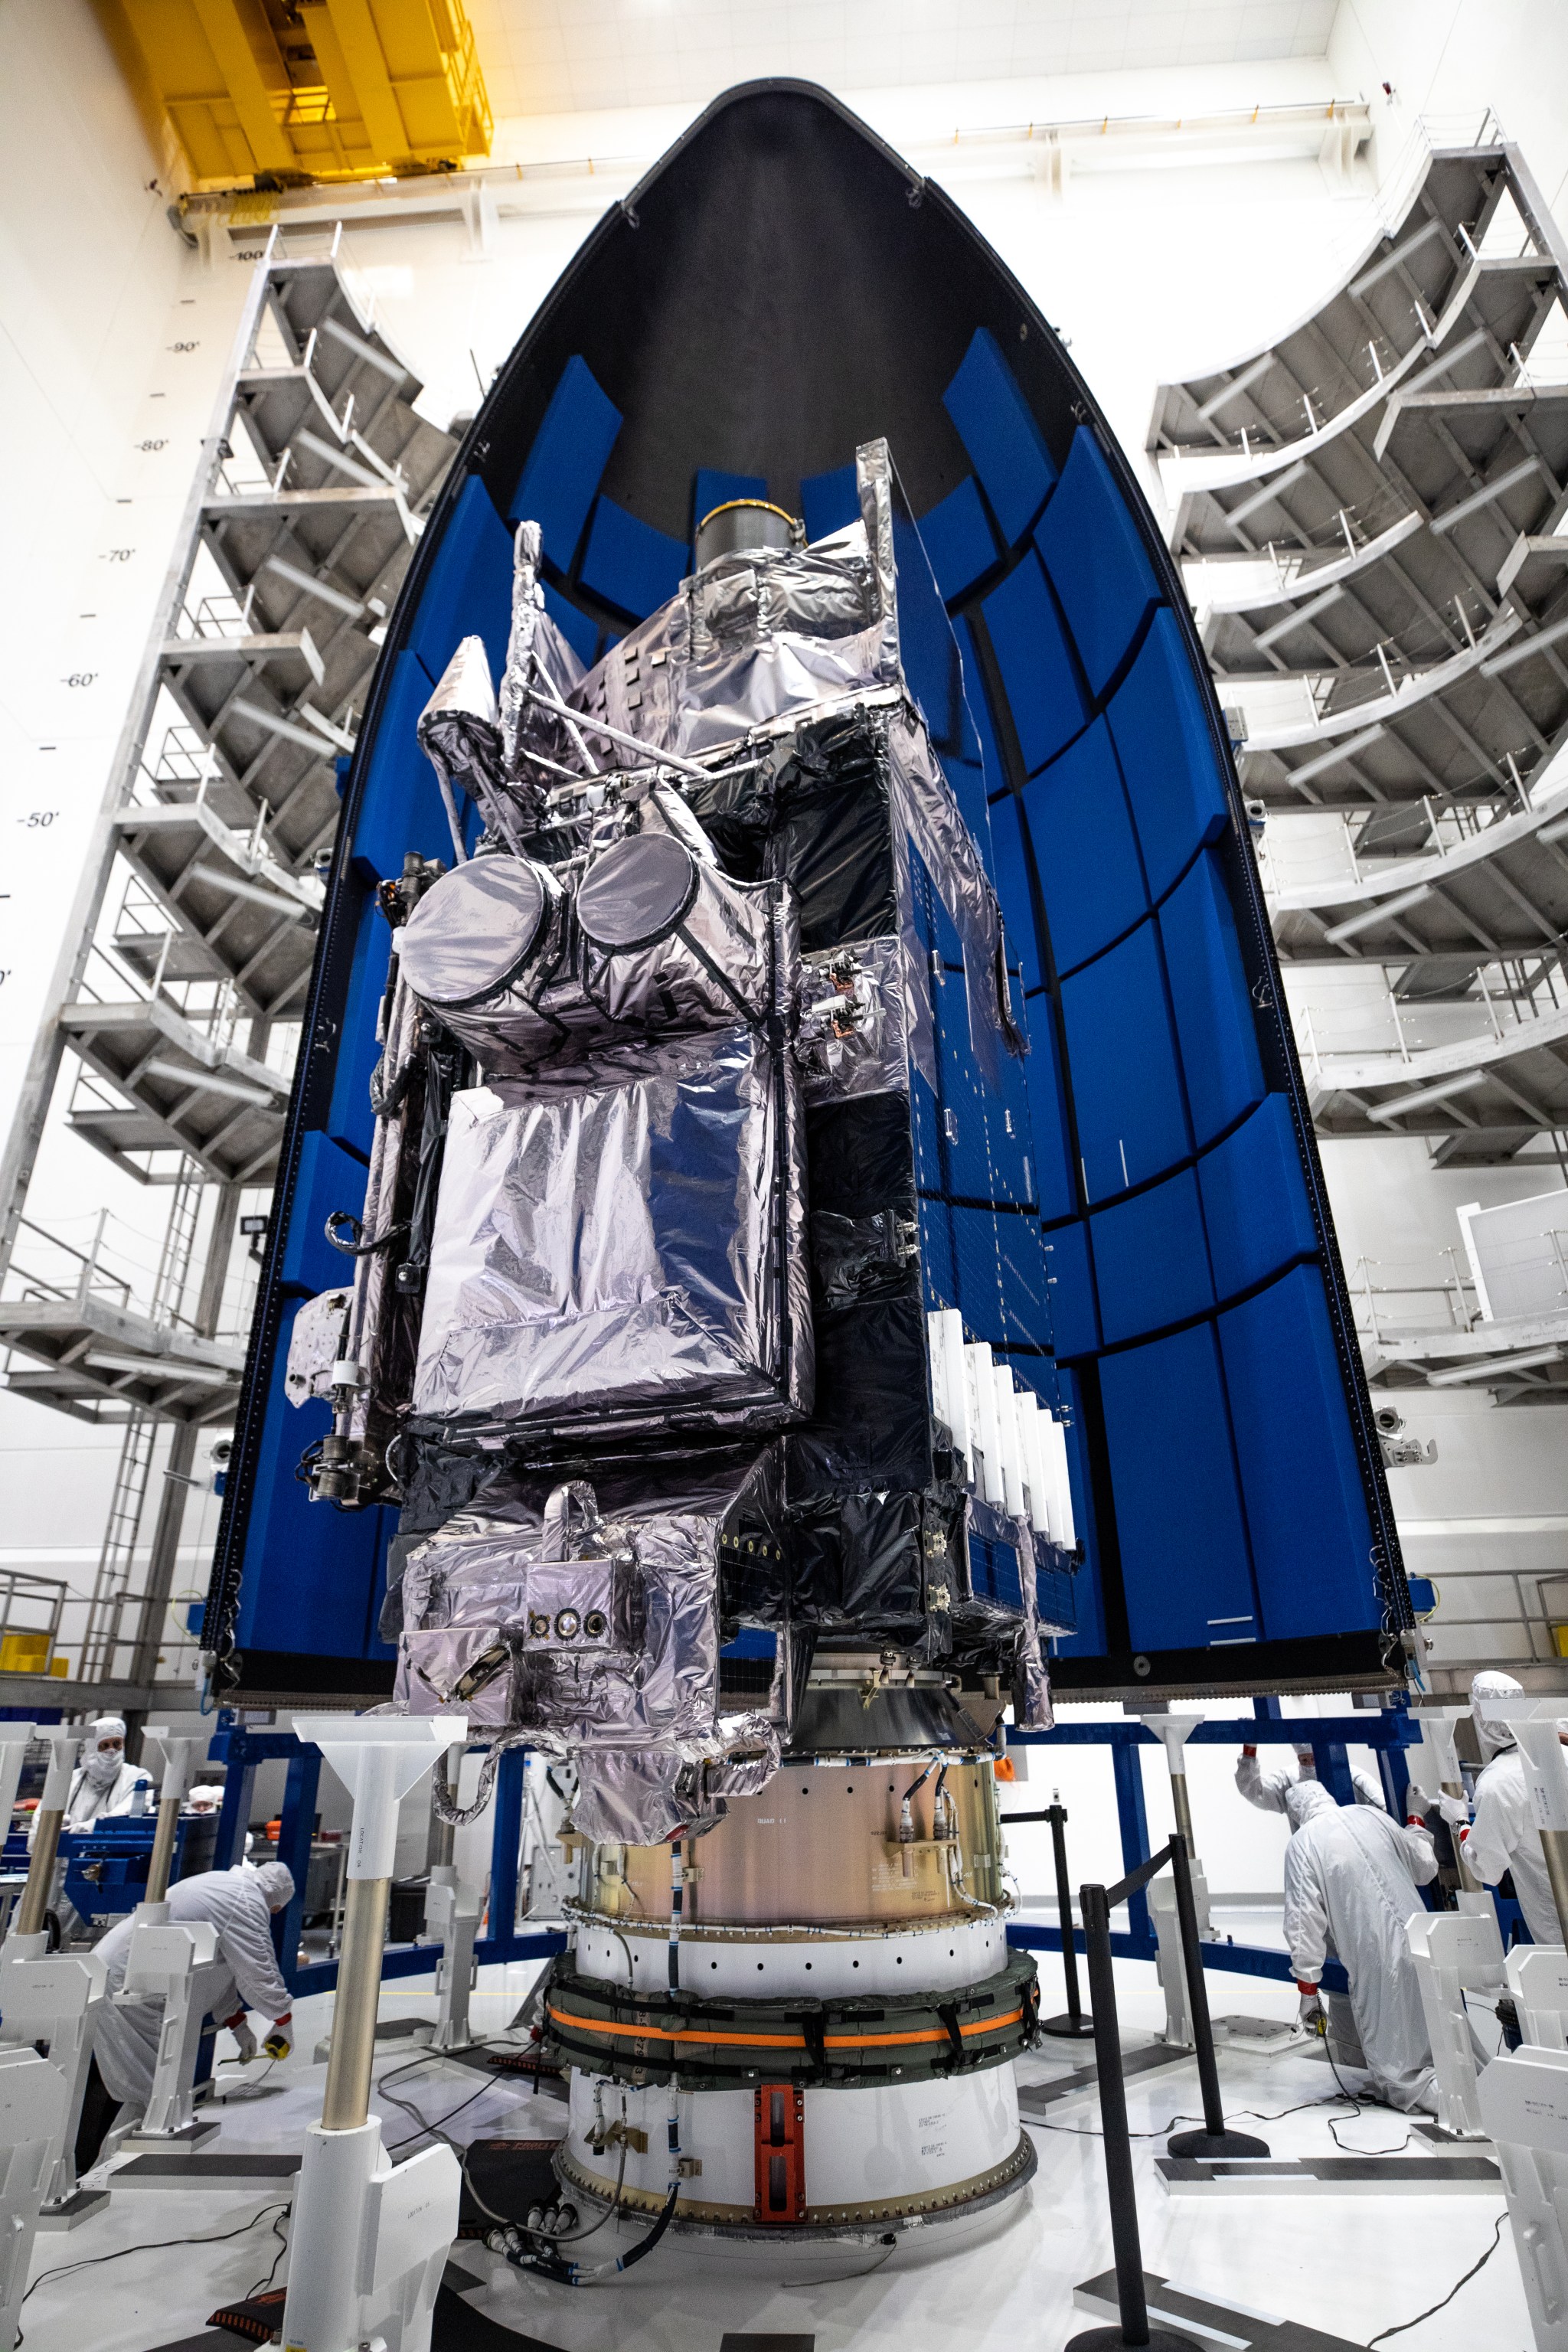 The first half of the United Launch Alliance Atlas V payload fairing is being secured around NOAA’s Geostationary Operational Environmental Satellite-T (GOES-T) inside the Astrotech Space Operations facility in Titusville, Florida, on Feb. 7, 2022.